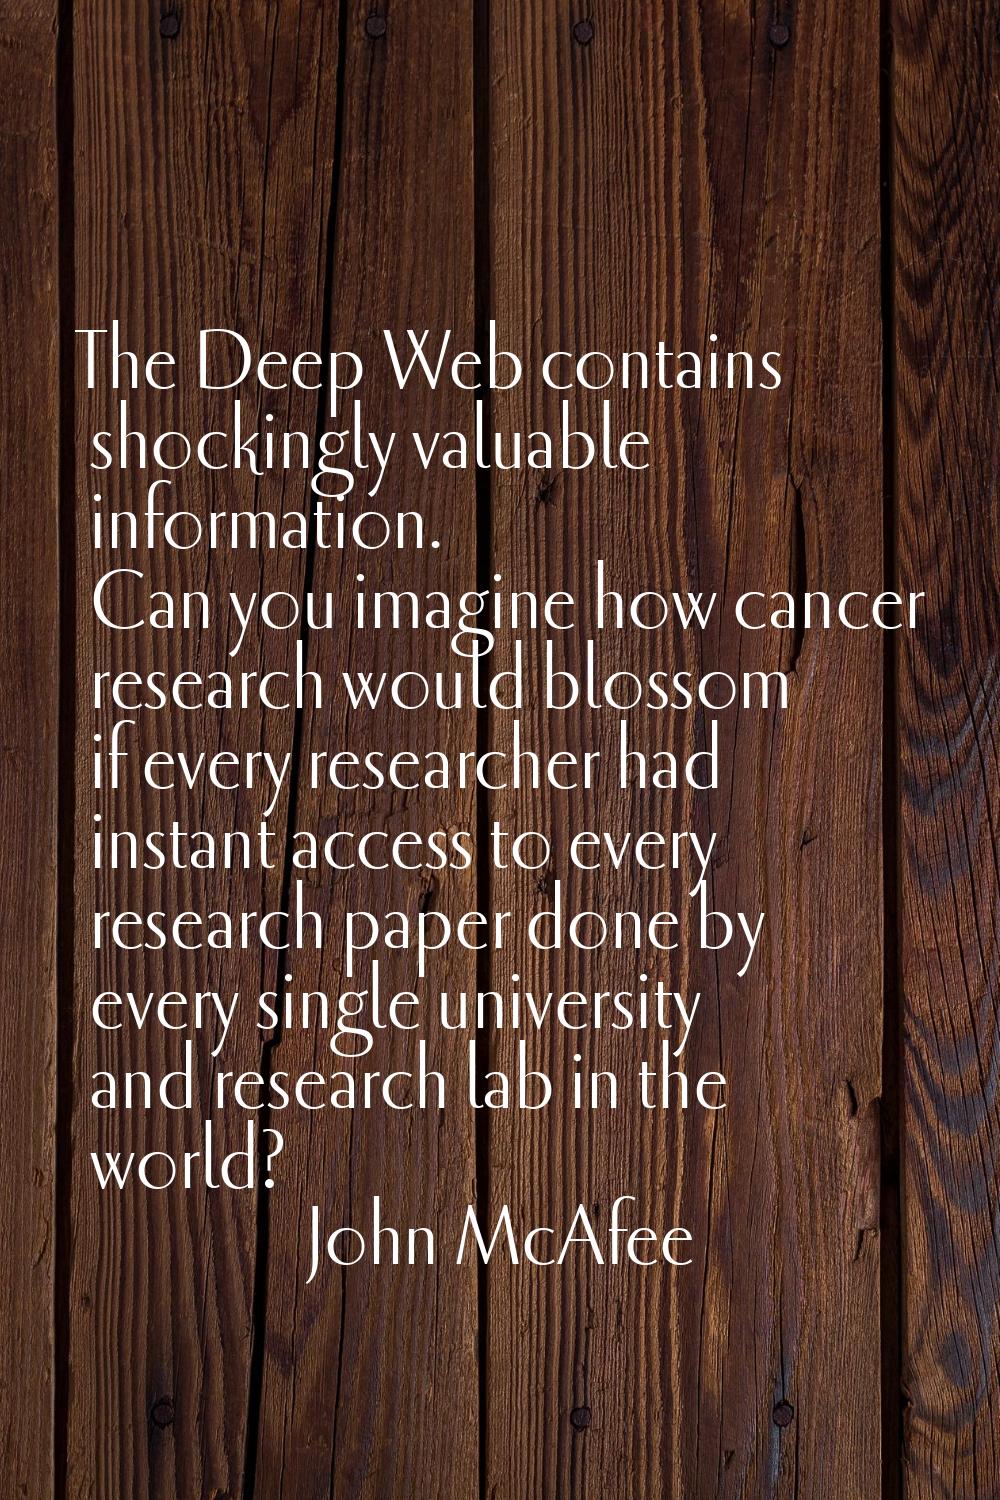 The Deep Web contains shockingly valuable information. Can you imagine how cancer research would bl